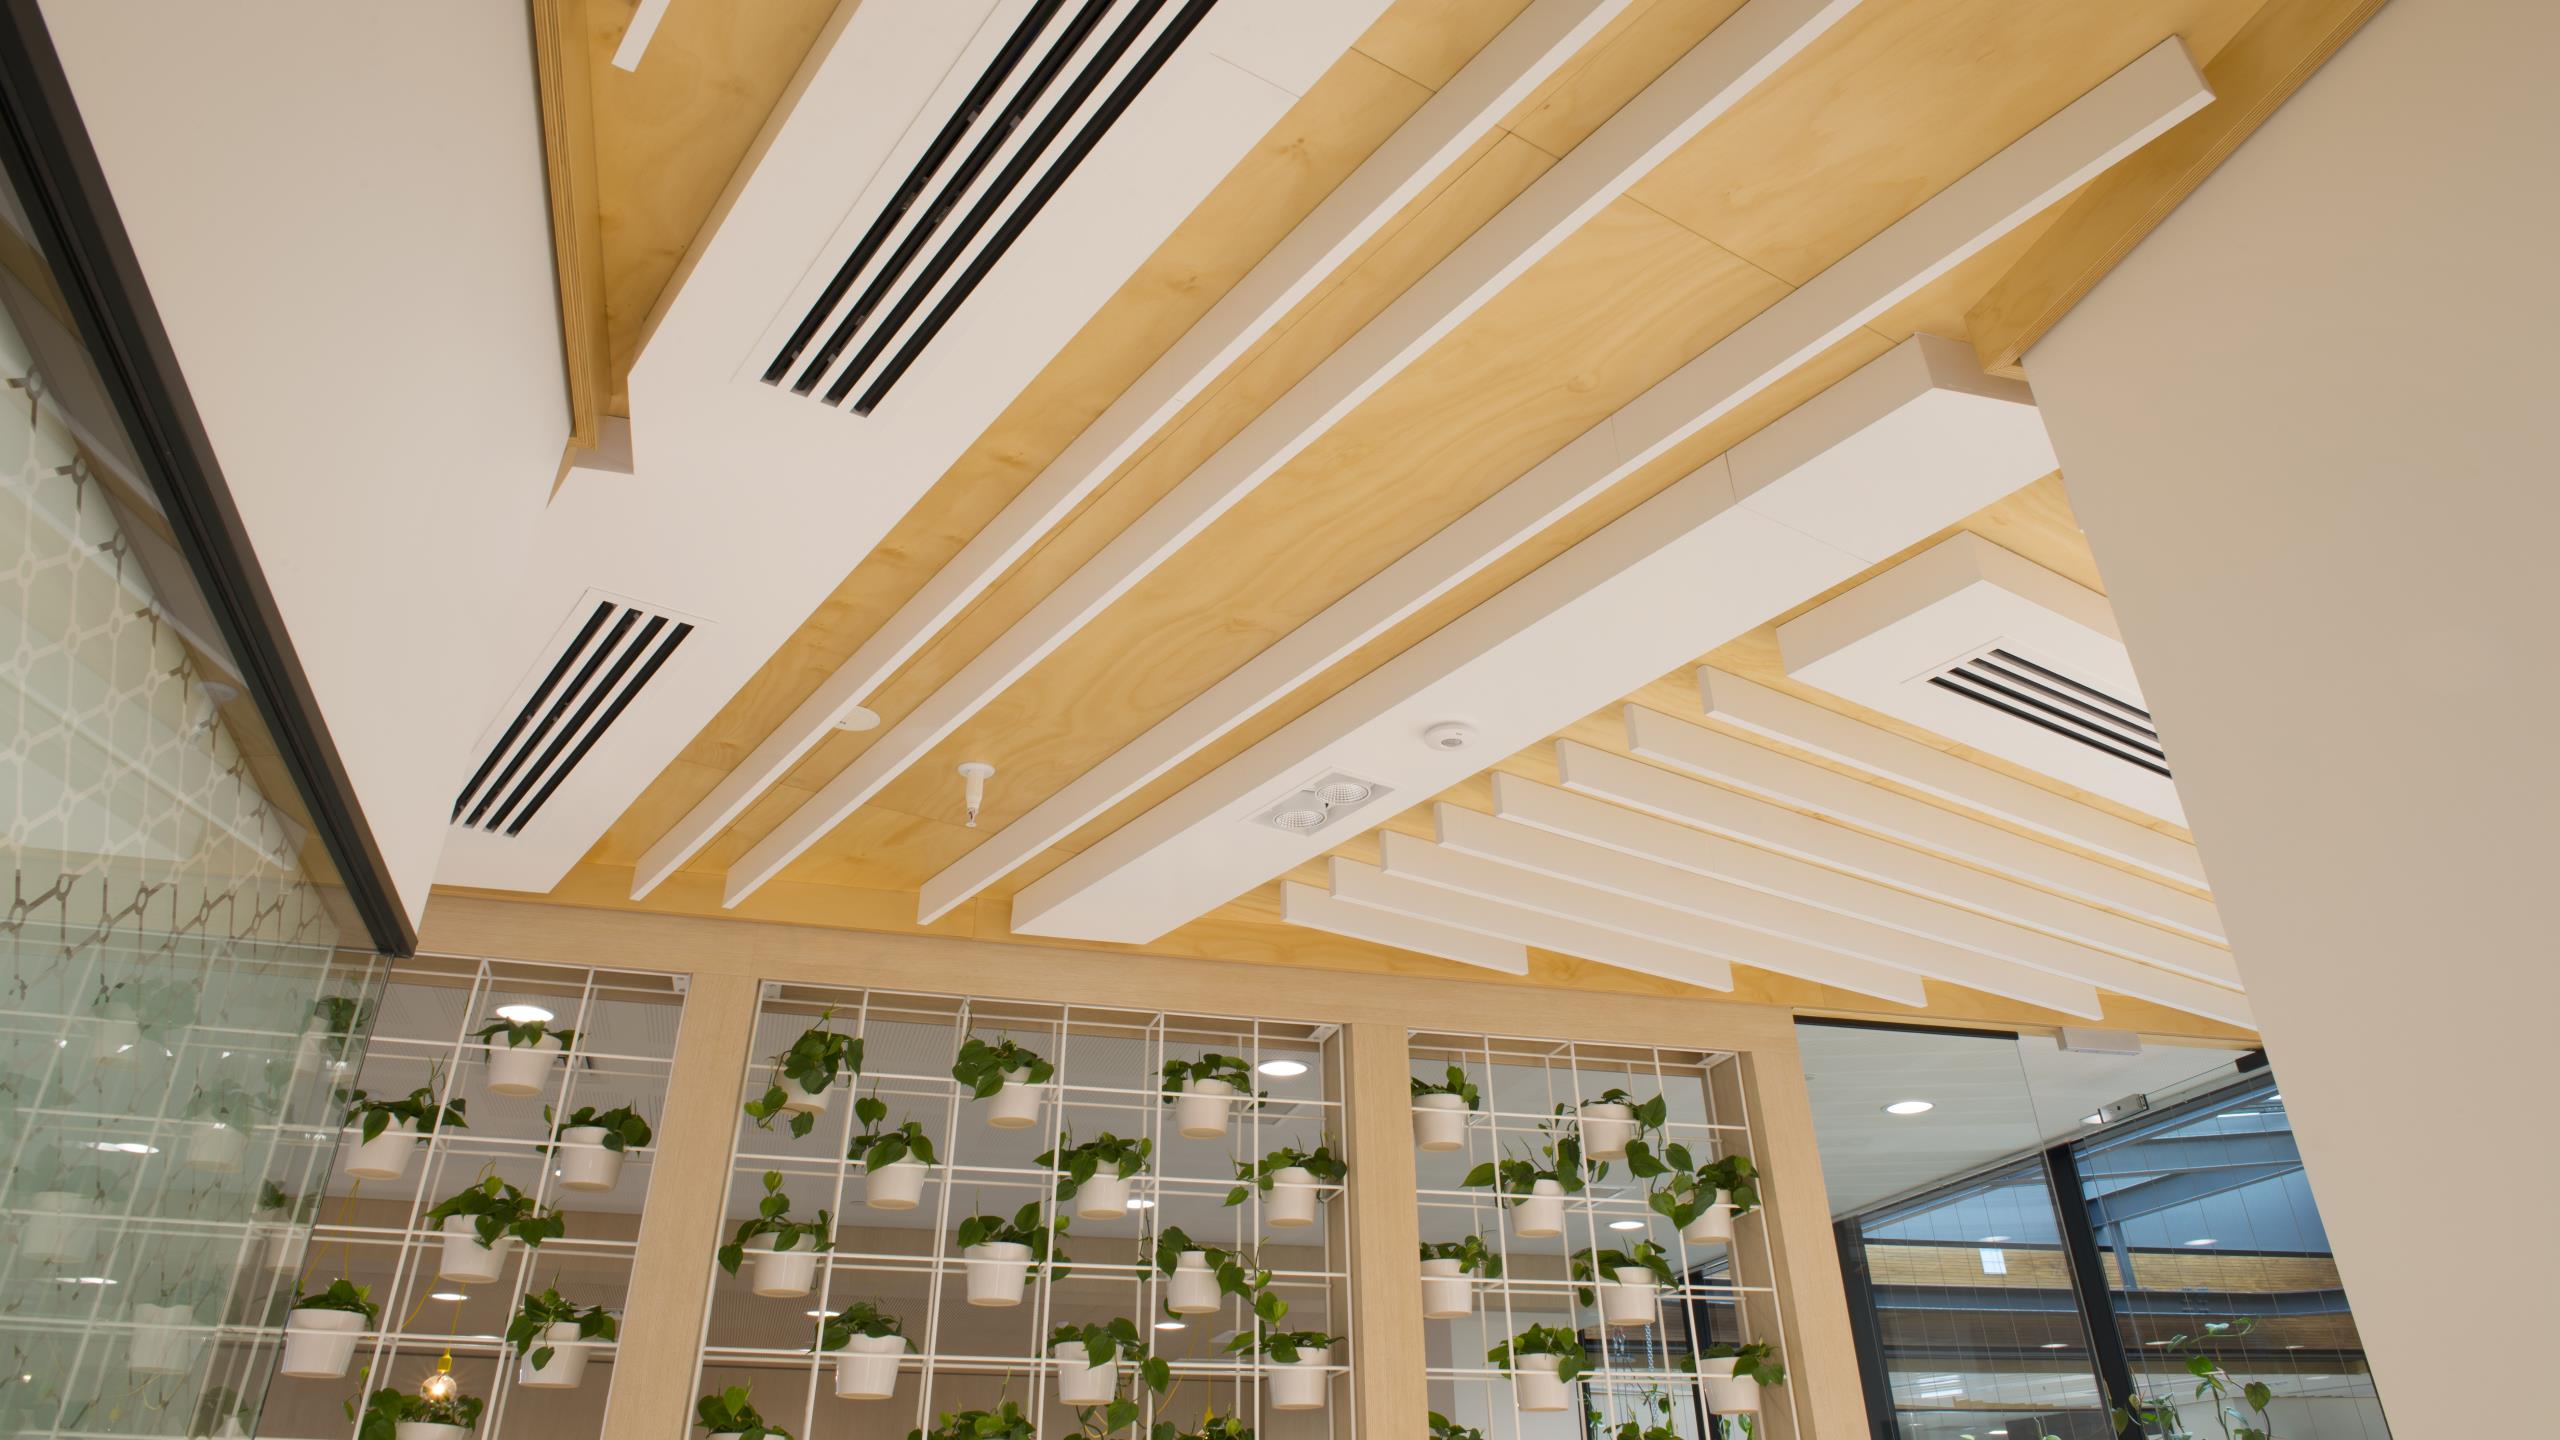 Meredith Connell - Ridgeline Ceiling Fin System